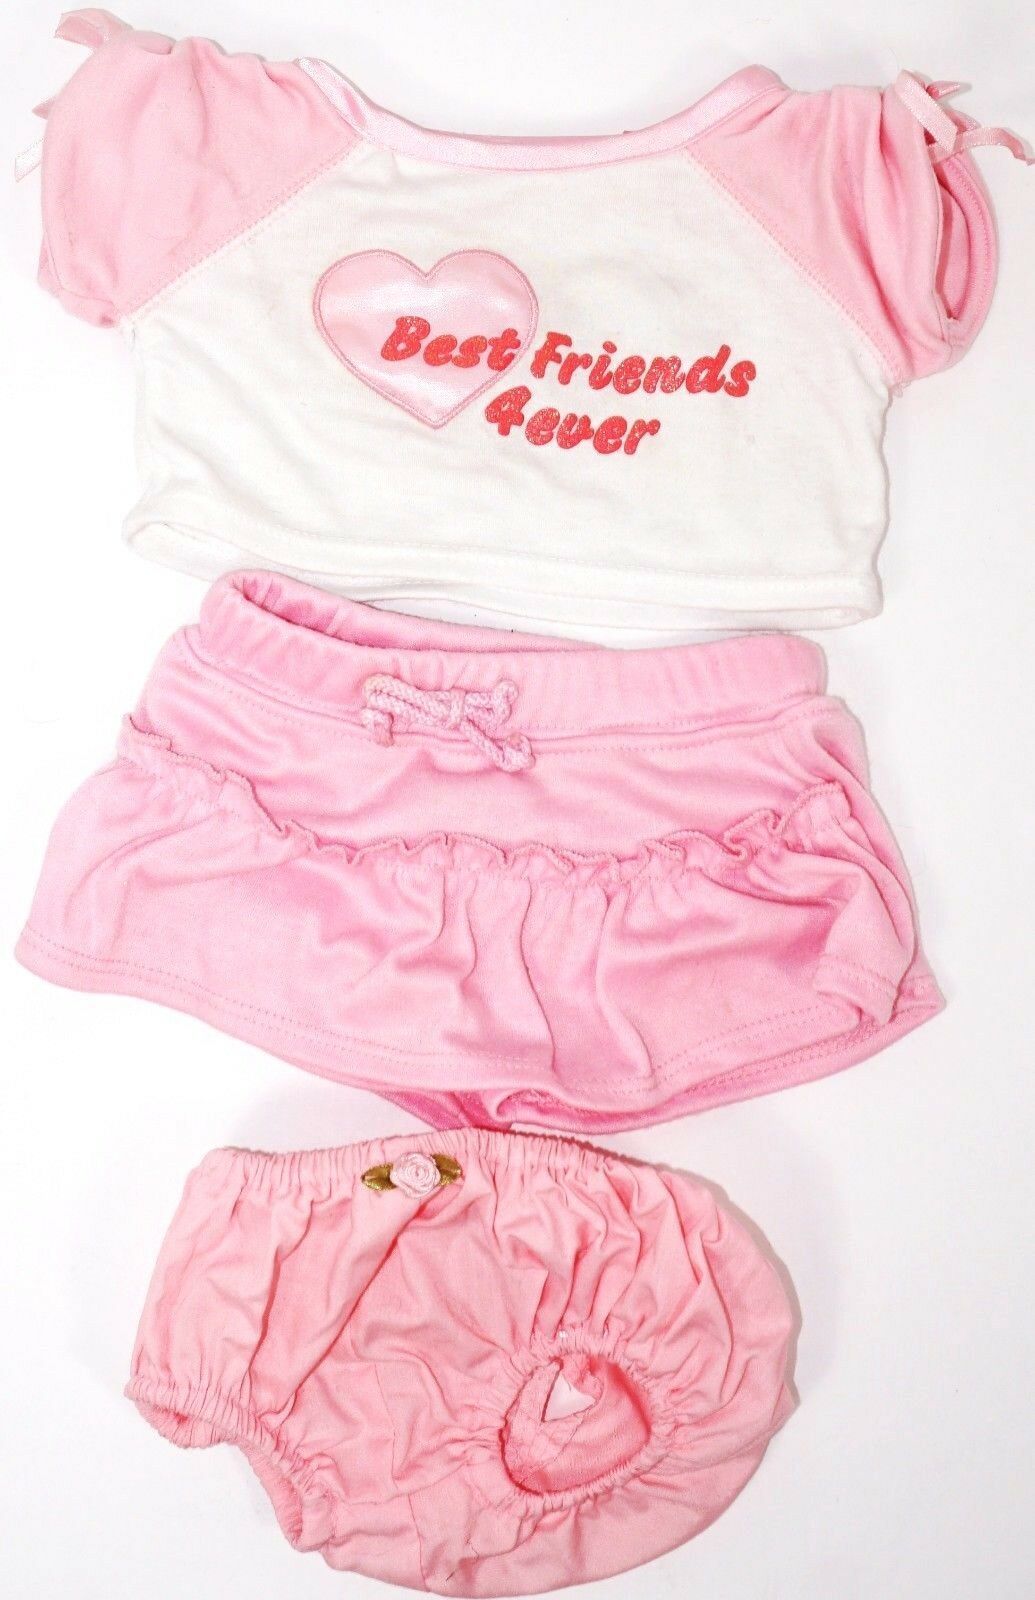 BABW BEST FRIENDS 4 EVER ACCESSORY CLOTHING ITEM - BUILD A BEAR WORKSHOP OUTFIT - $8.00